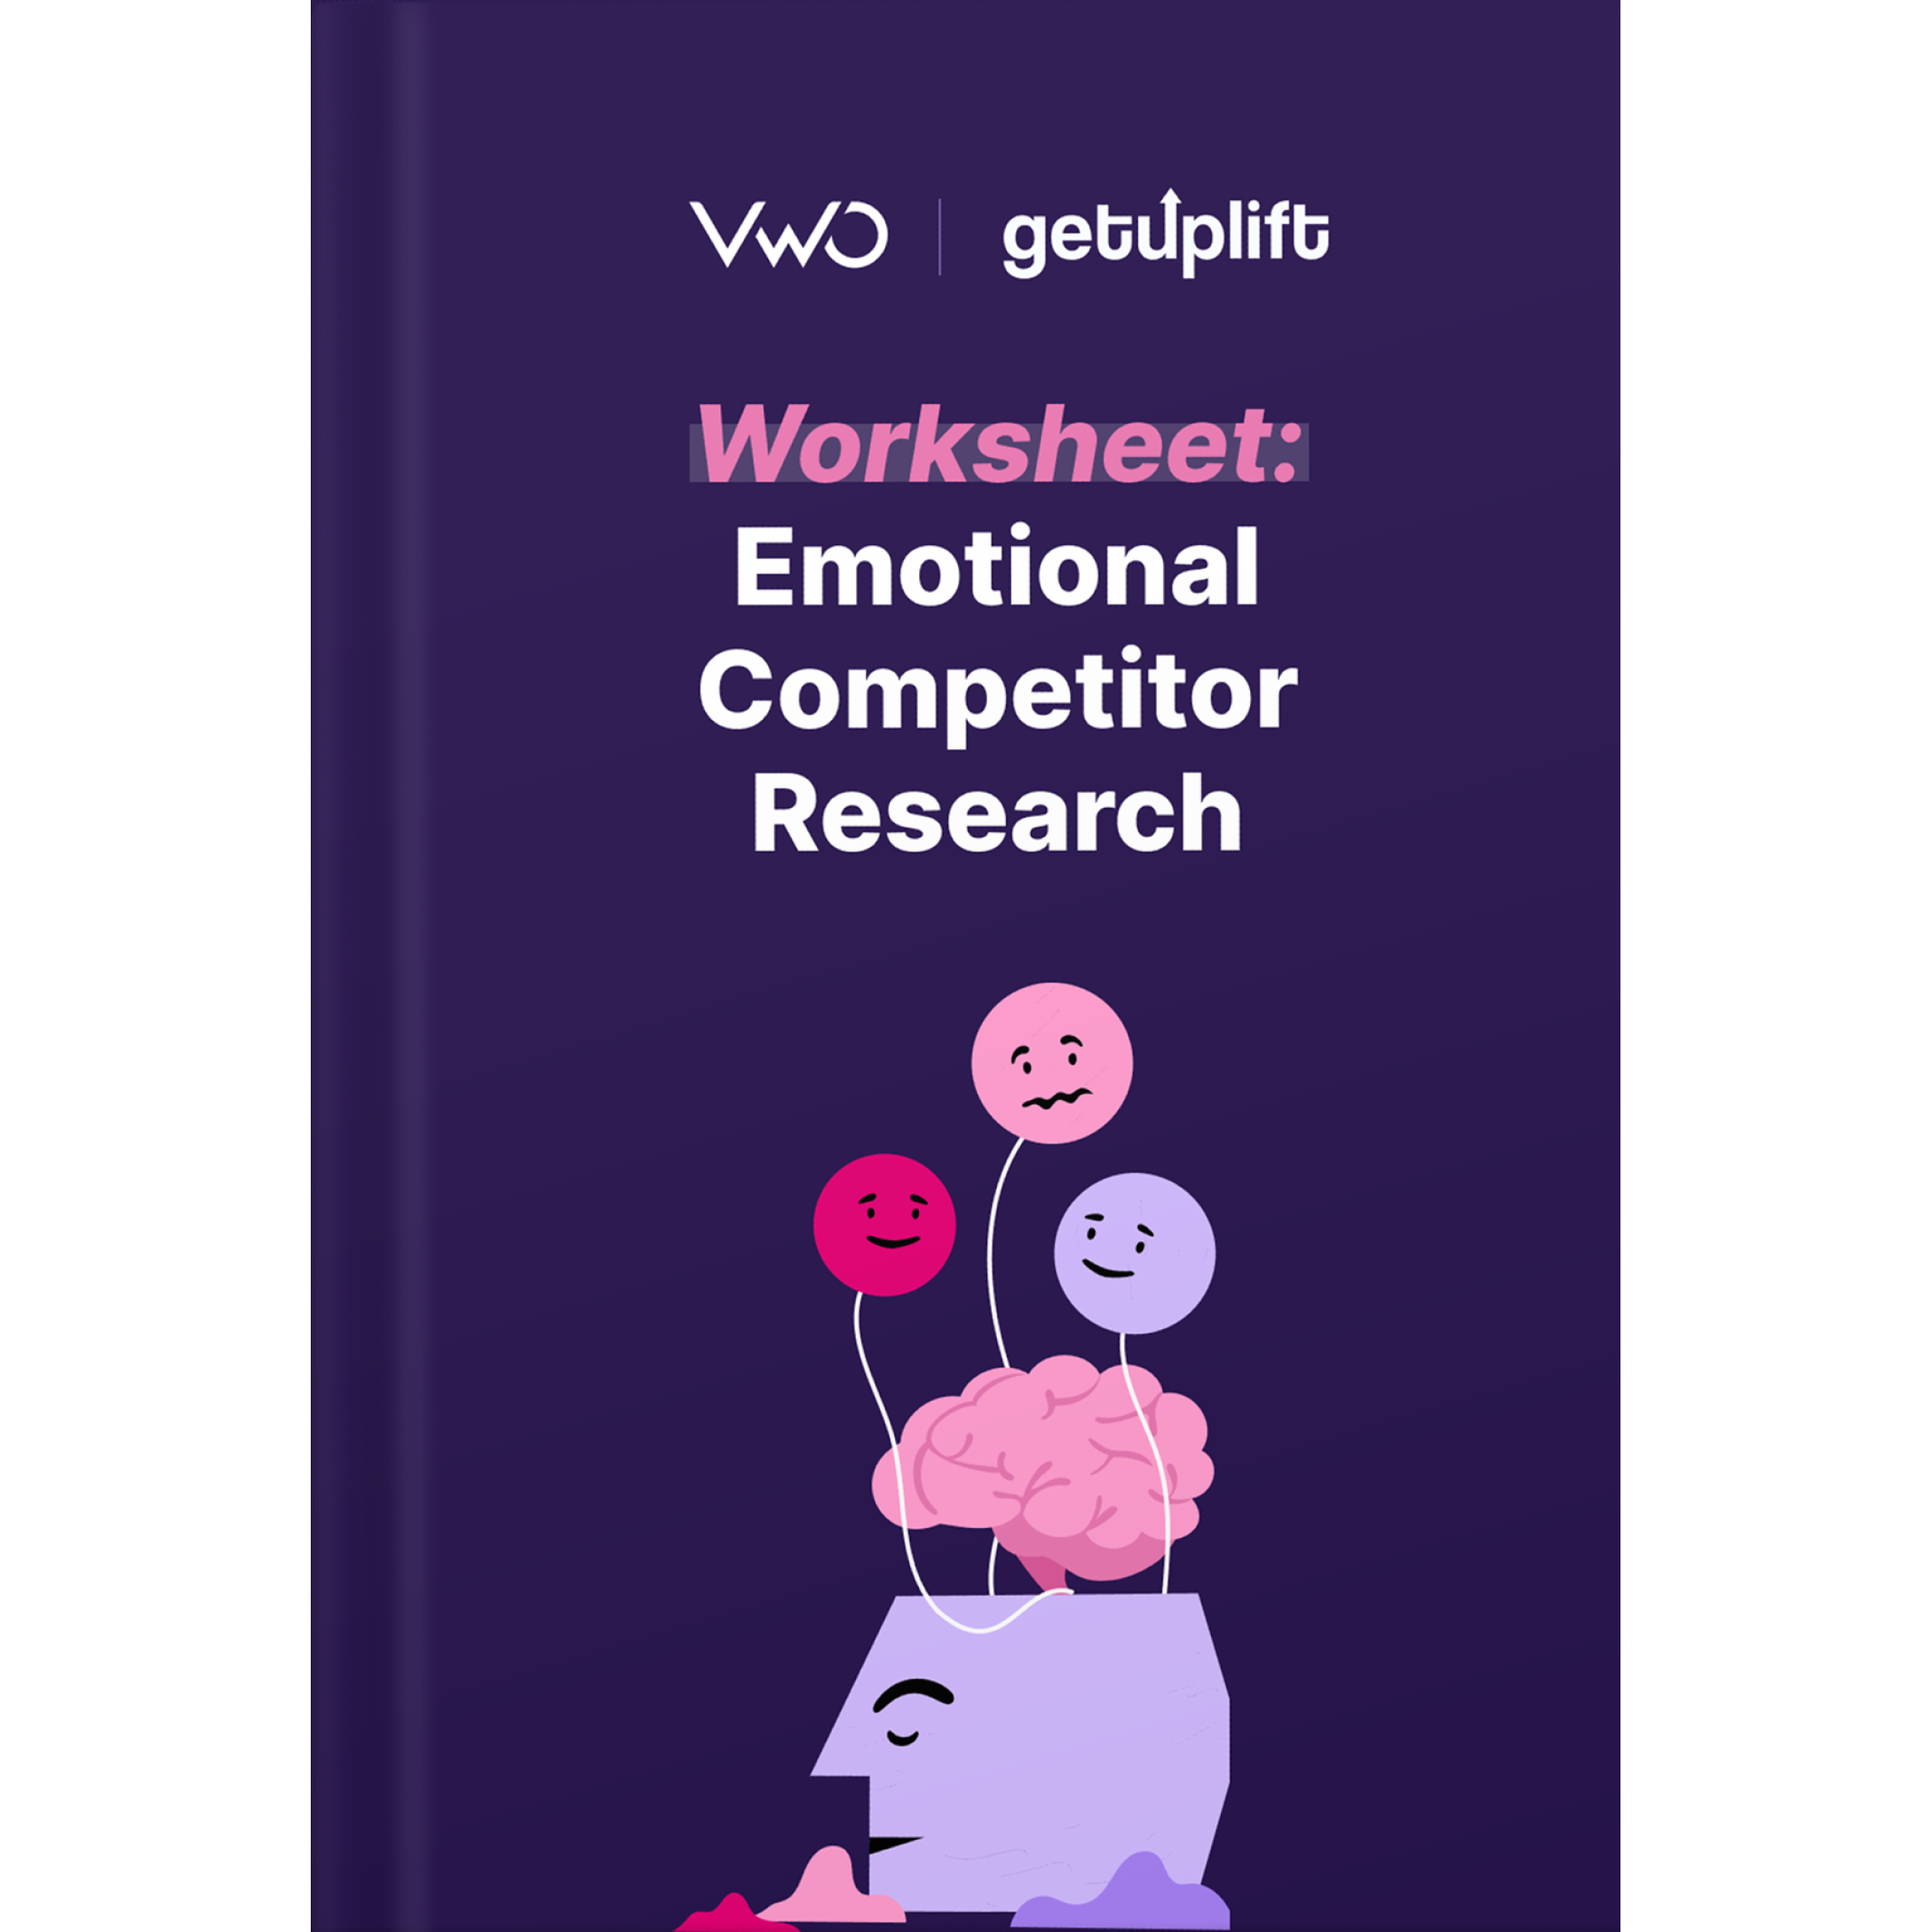 Worksheet: Emotional Competitor Research